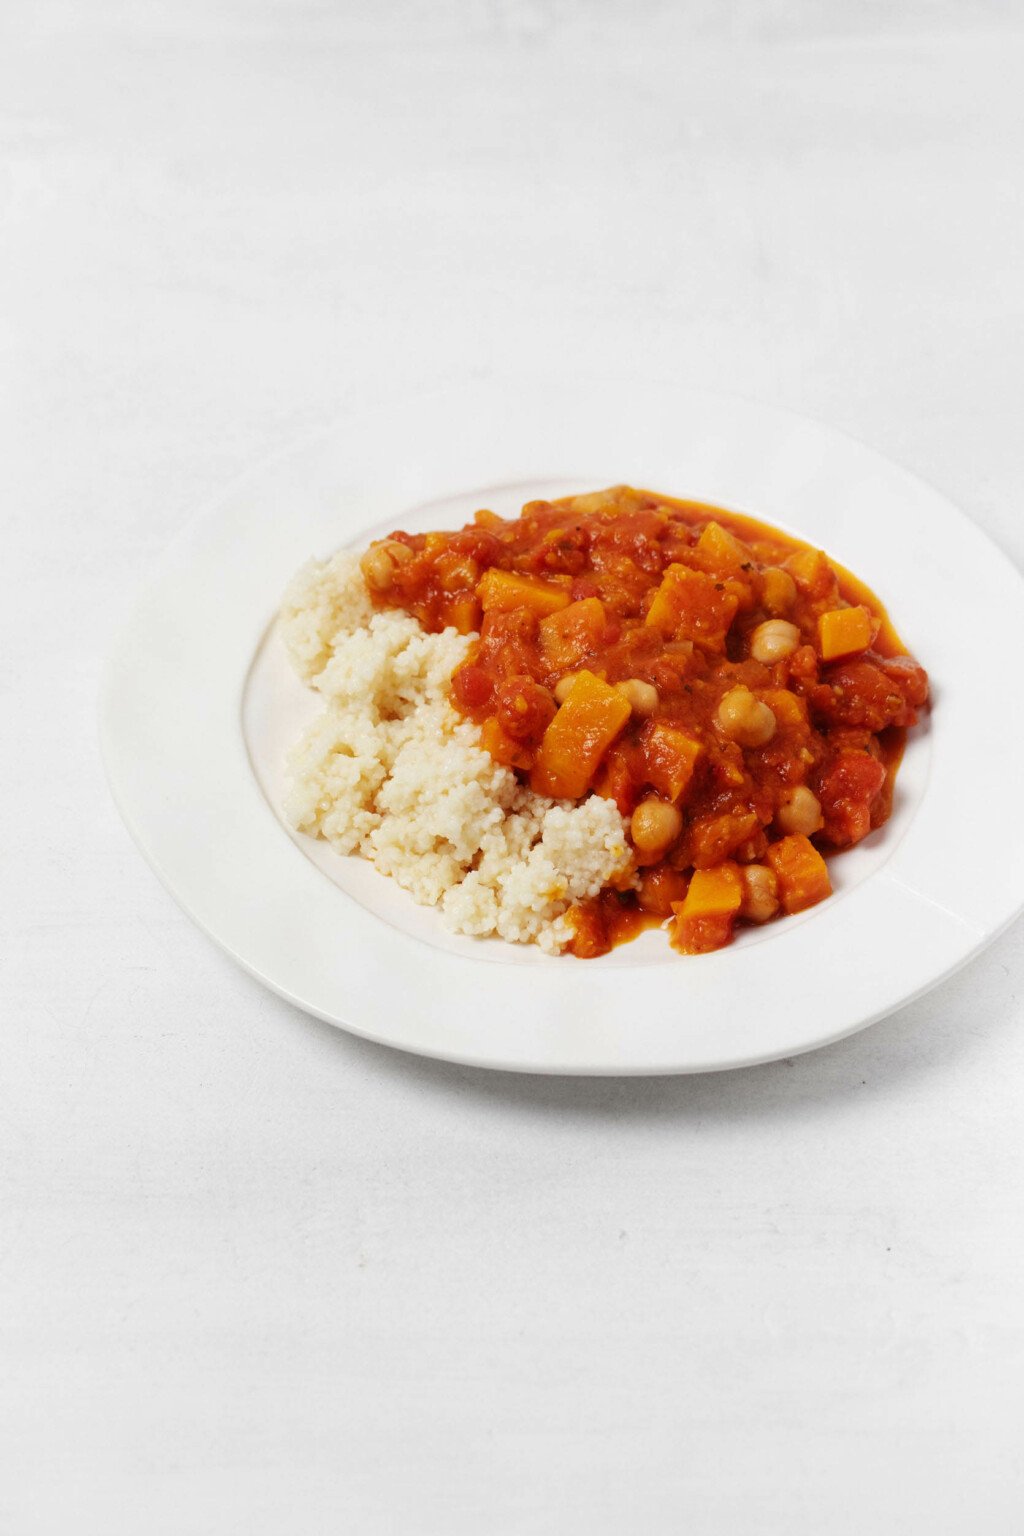 A circular, rimmed white plate rests on a white surface.  On the plate are couscous and a Moroccan-inspired, butternut chickpea stew.